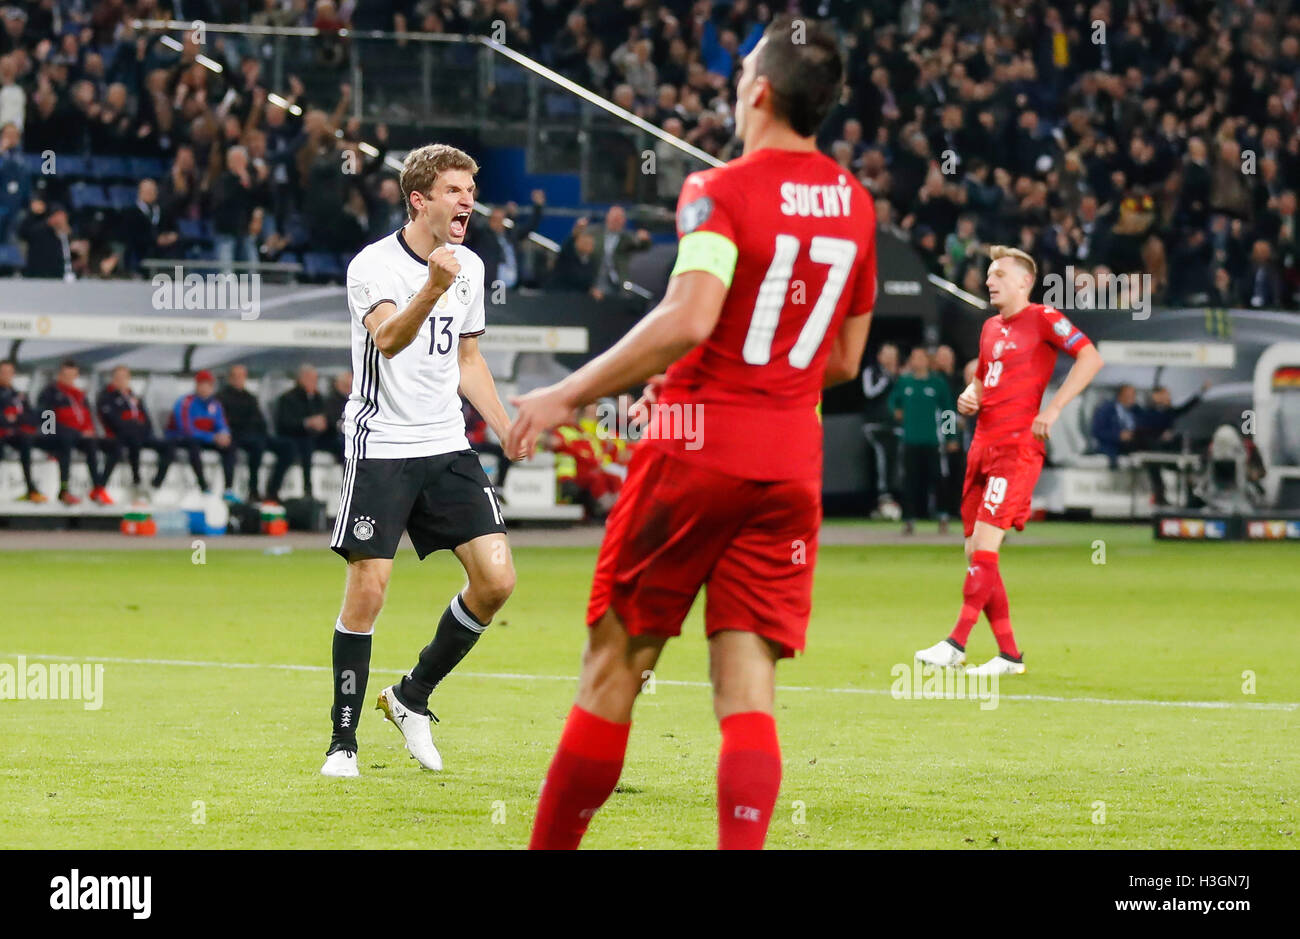 Hamburg, Germany. 08th Oct, 2016. Thomas MUELLER, DFB 13 celebrates his goalfot 1-0, Cheering, joy, emotions, celebrating, laughing, cheering, rejoice, tearing up the arms, clenching the fist, World Cup Qualification Germany - Czech Republic 3-0 in Hamburg, Germany at October 8, 2016/08.10.2016 Credit:  Peter Schatz/Alamy Live News Stock Photo